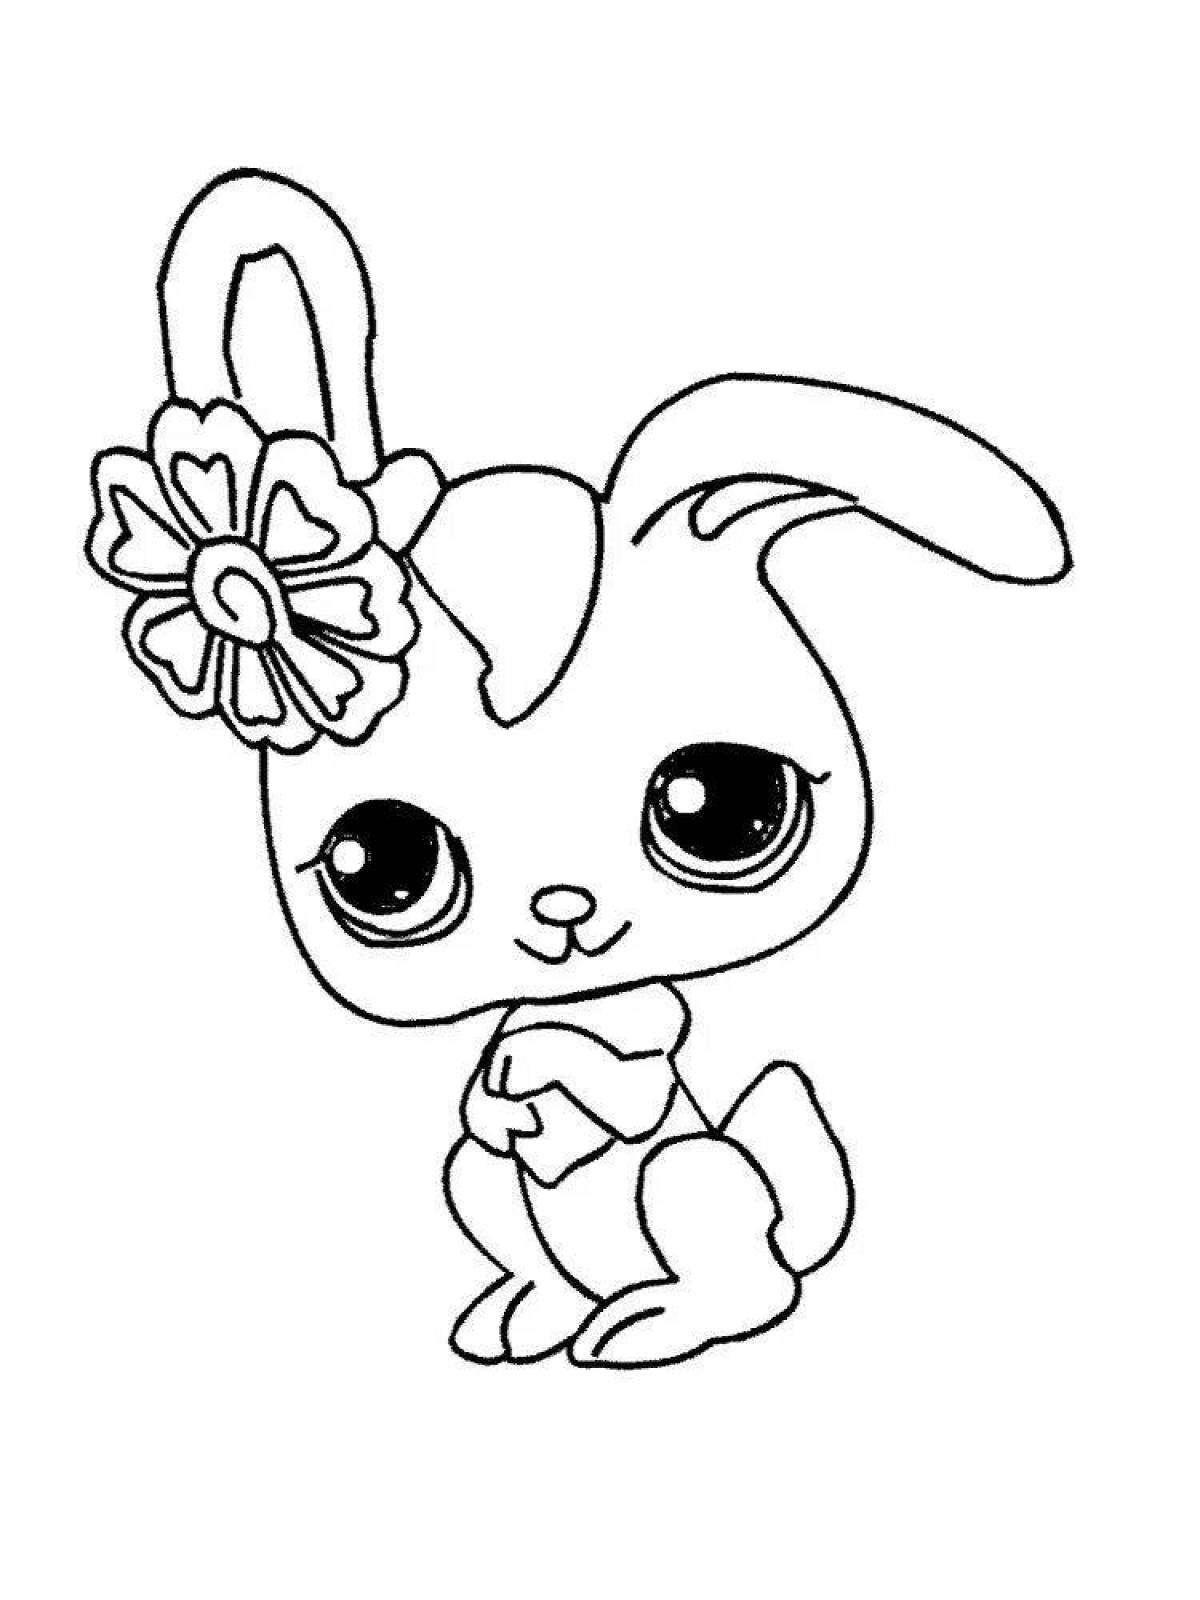 Soft and fun pet coloring pages